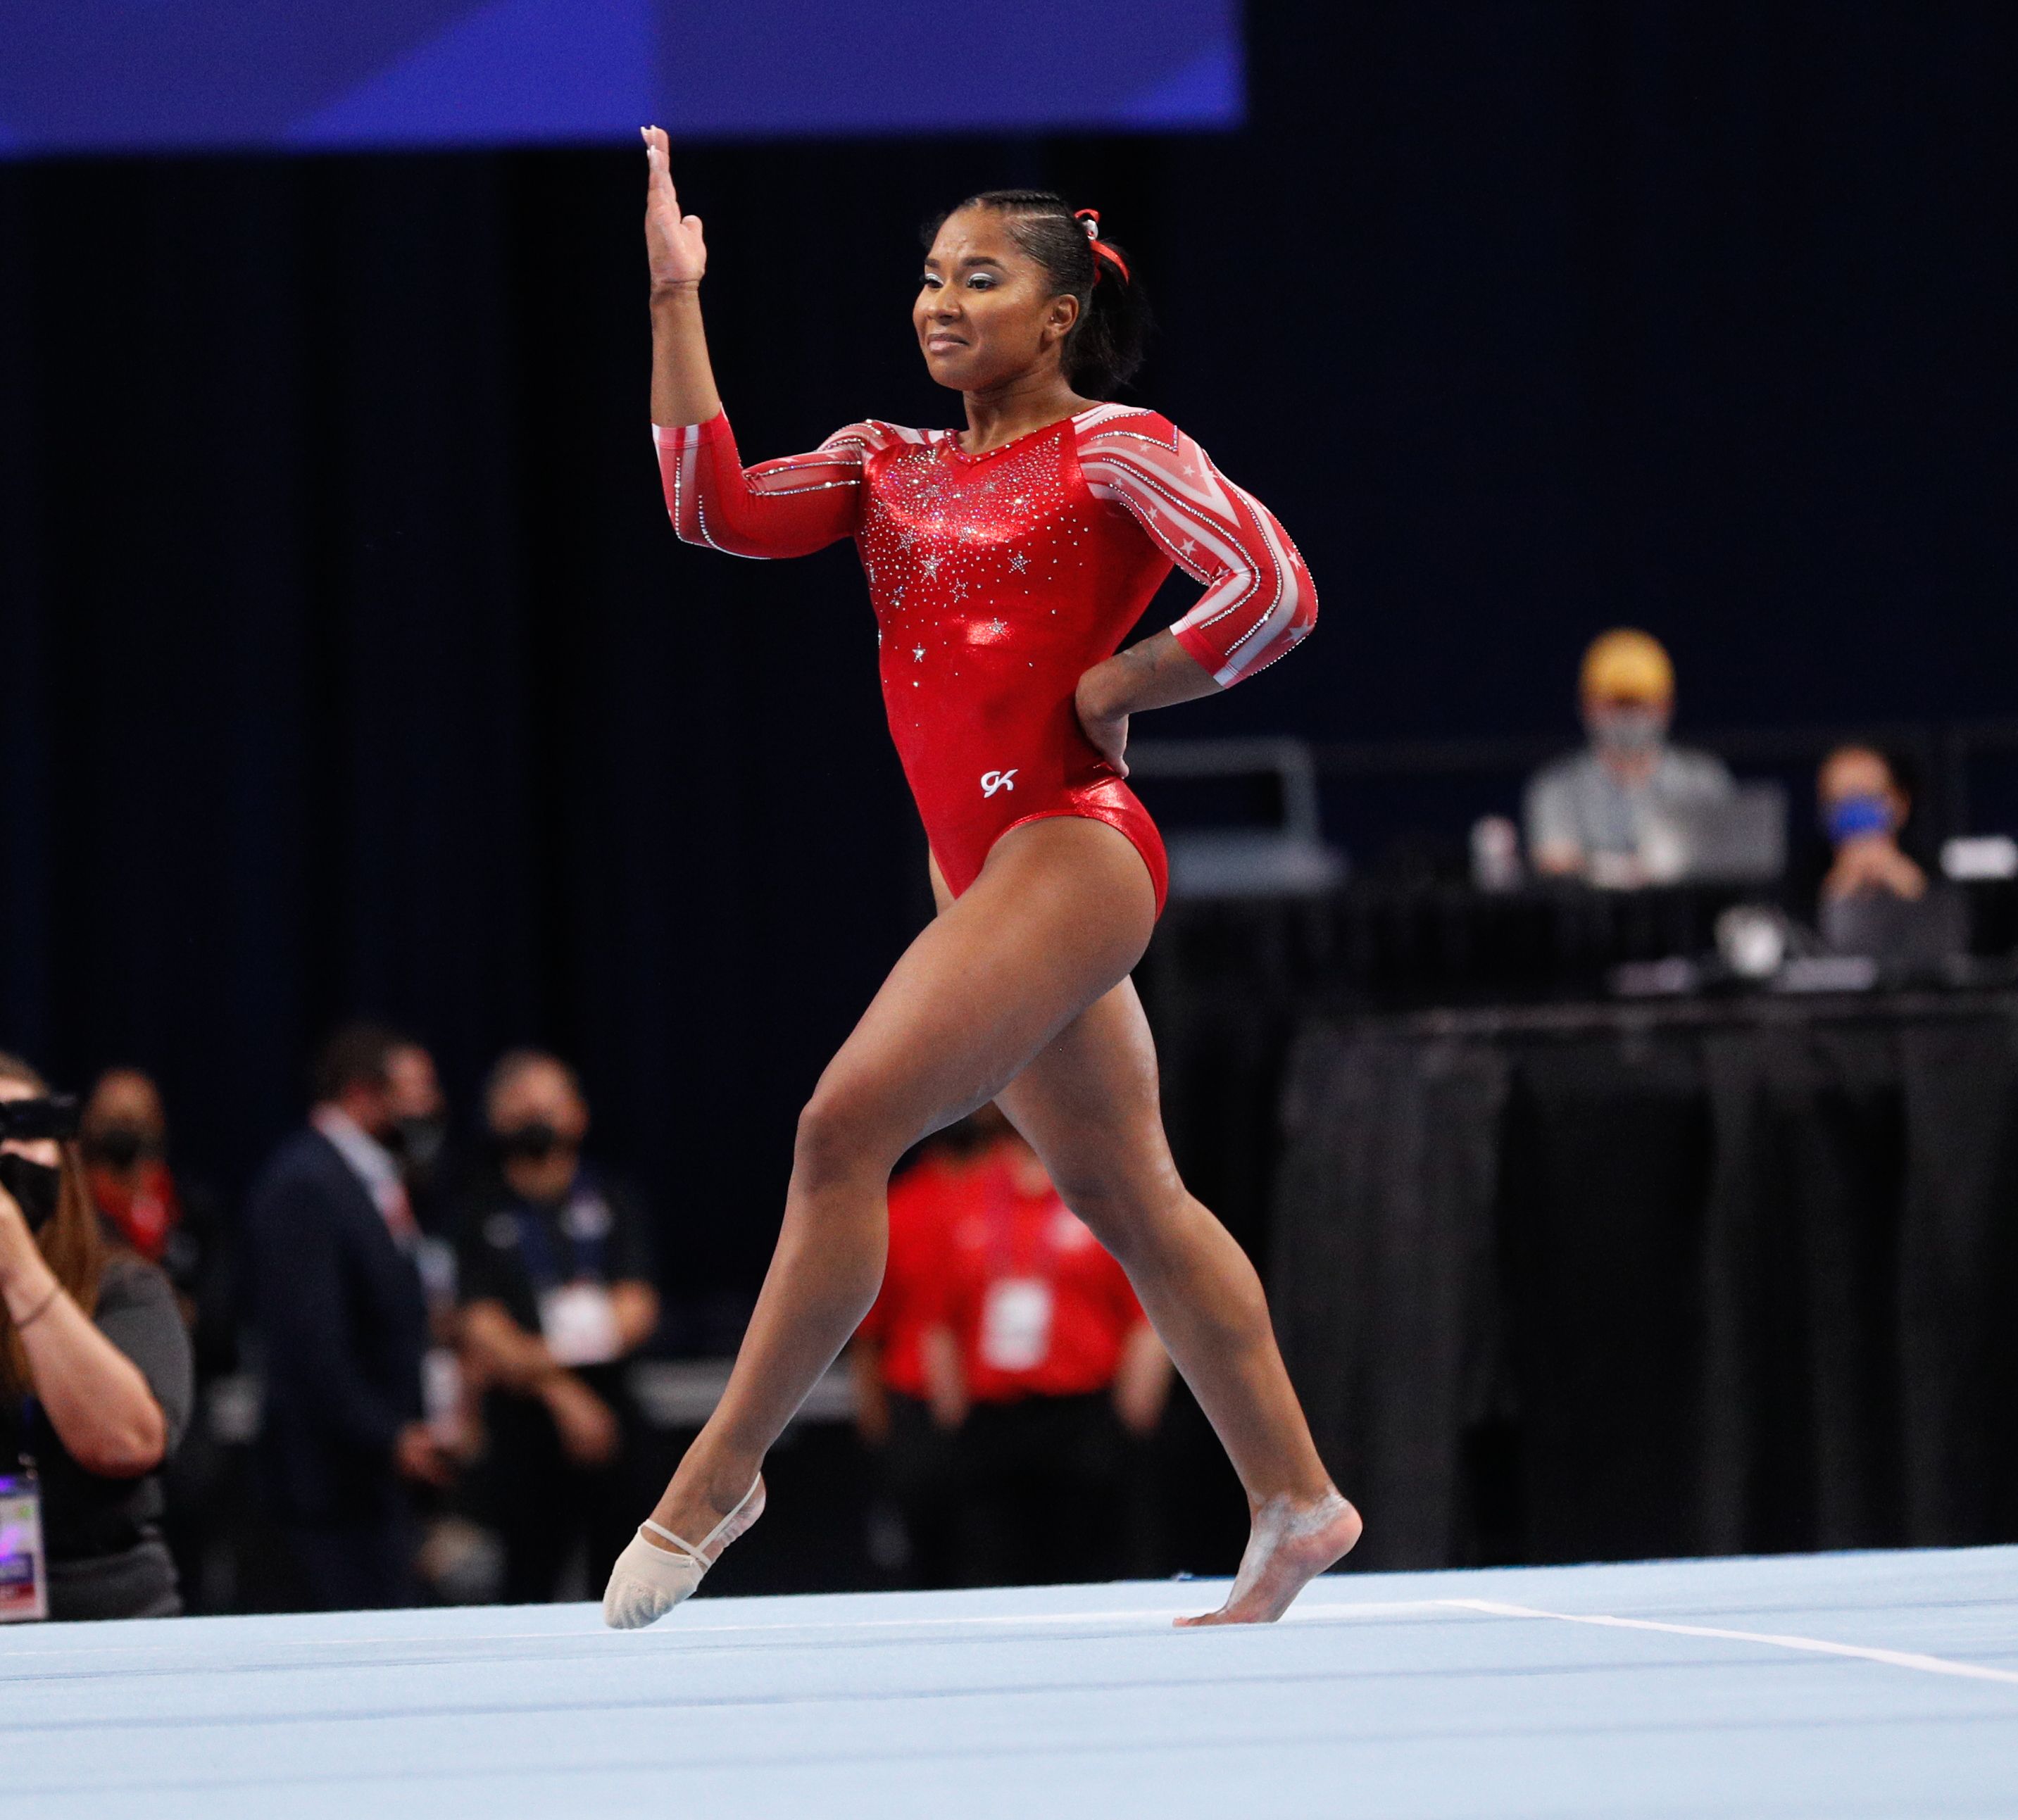 Jordan Chiles' Gymnastics Medals How Many Does She Have? Life & Style